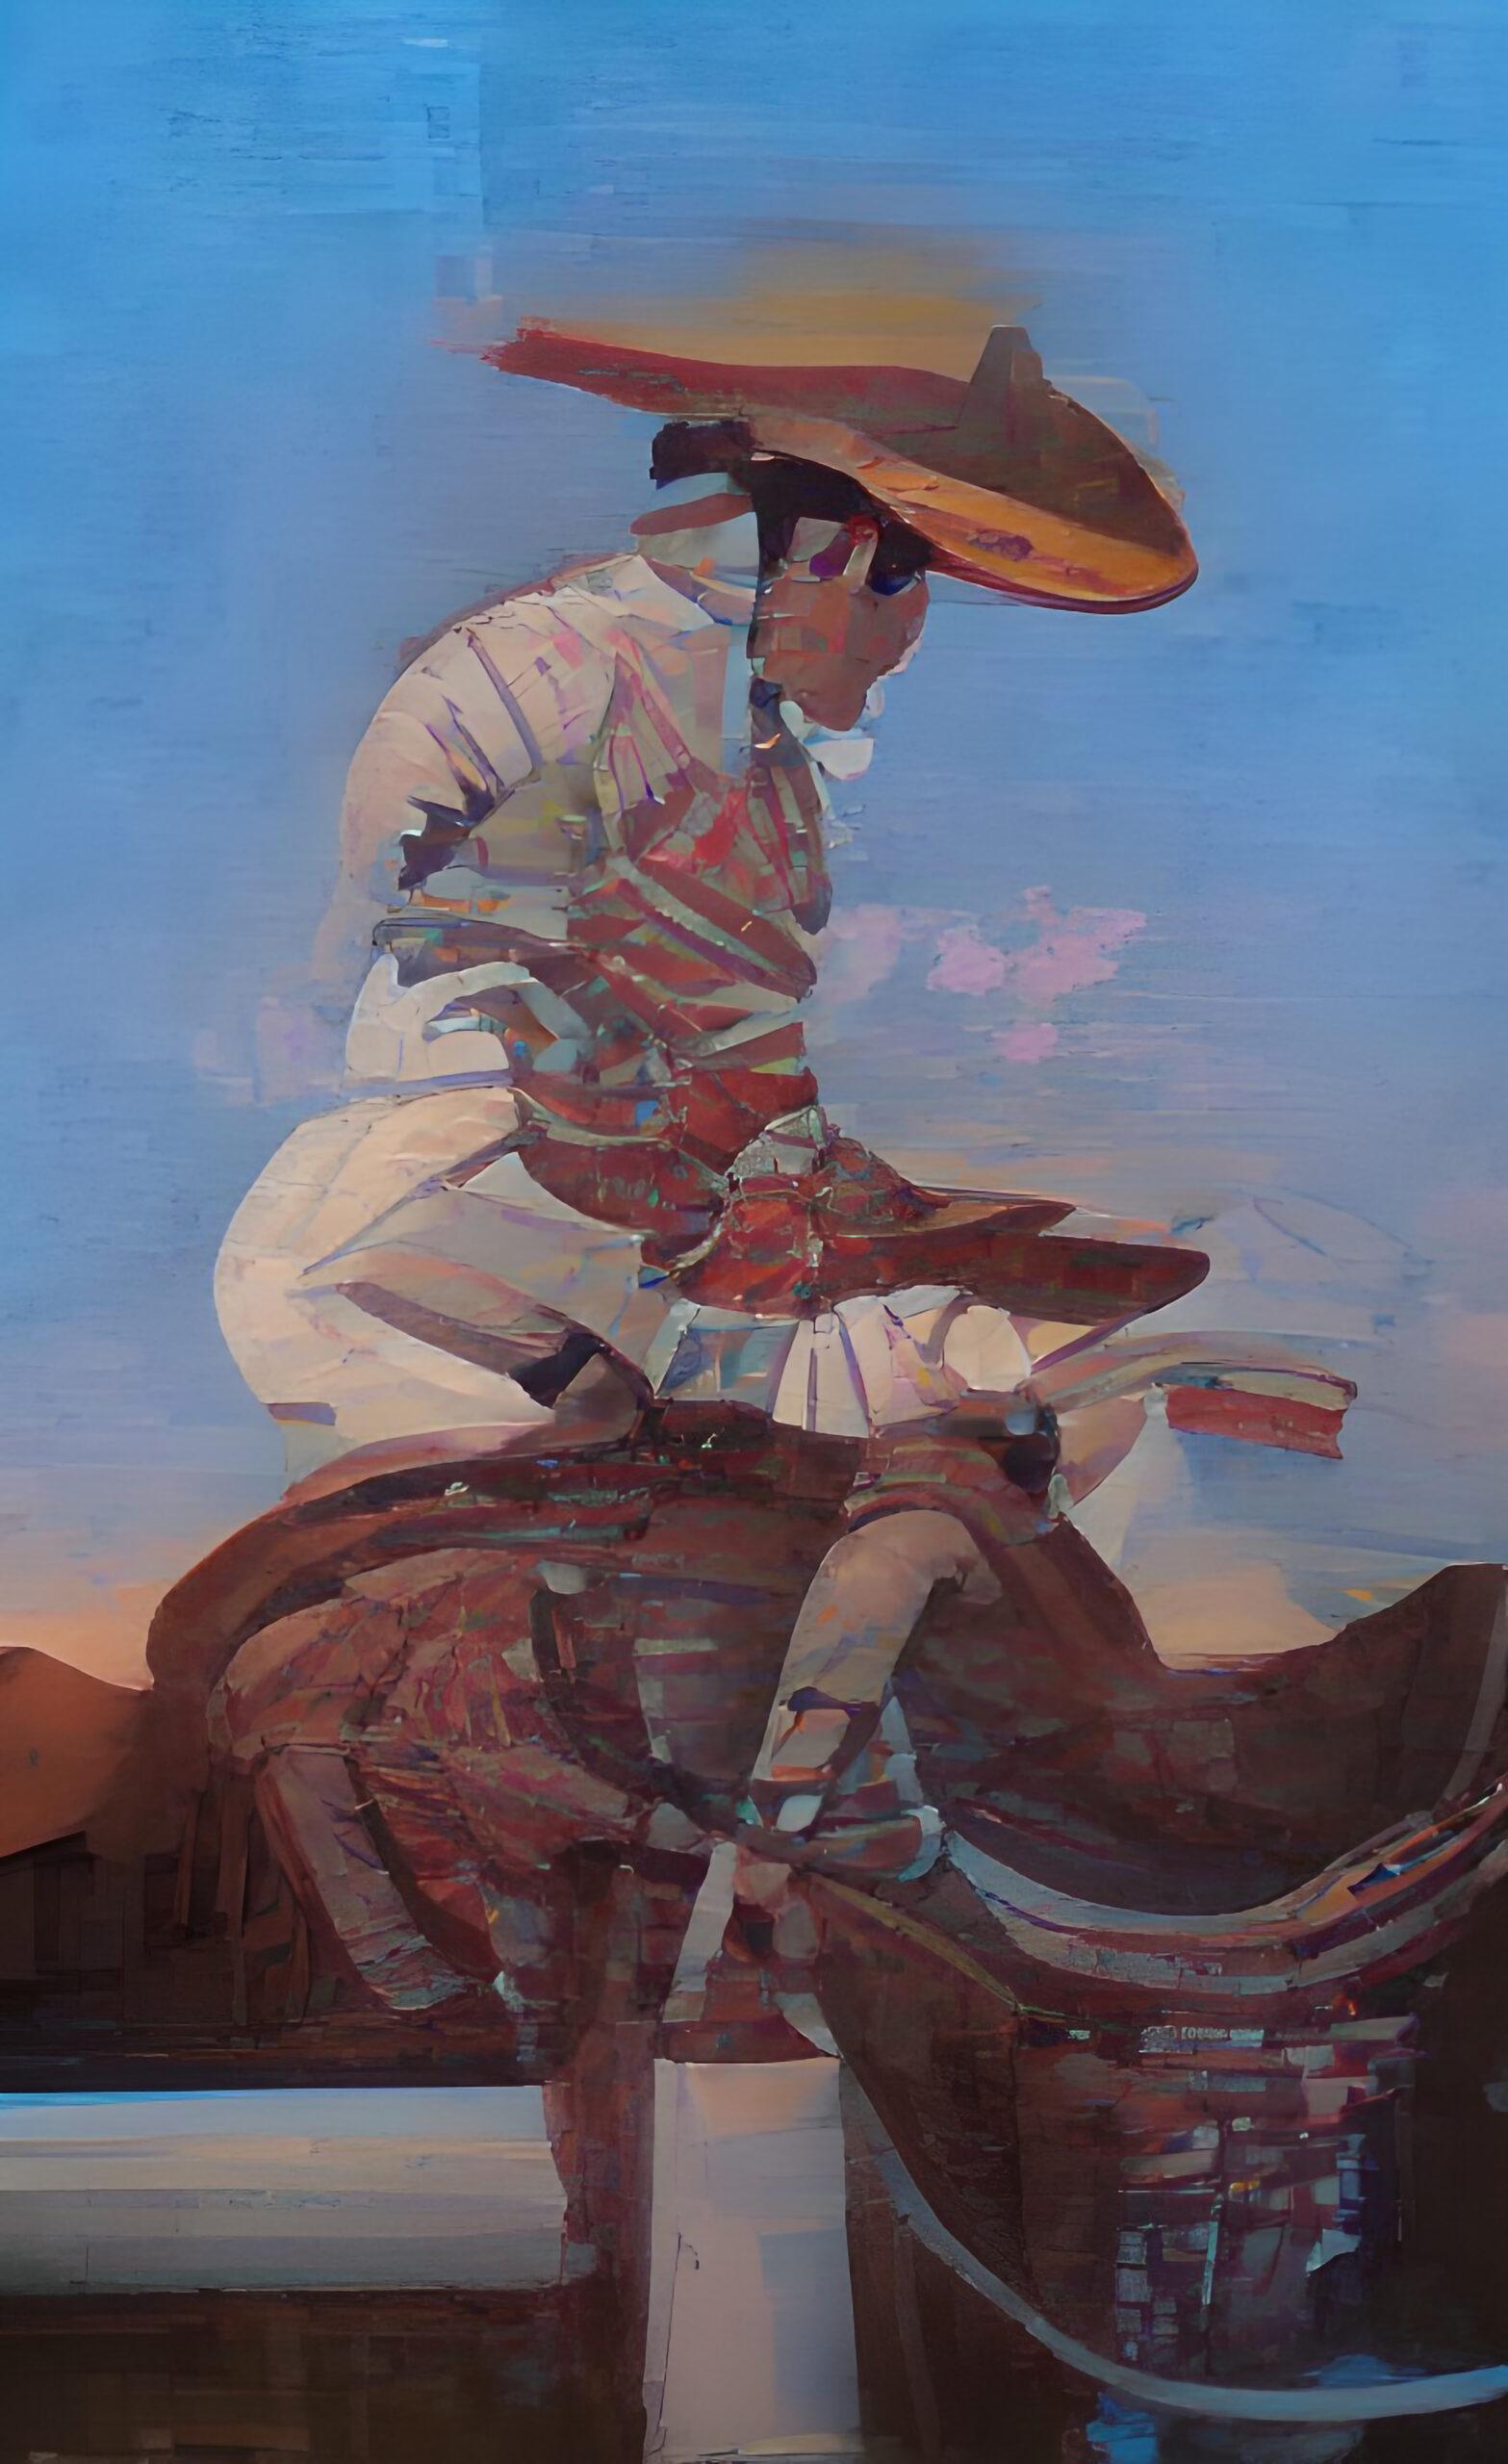 Mexican Rider - Mixed Media Art by Mateo Vegas